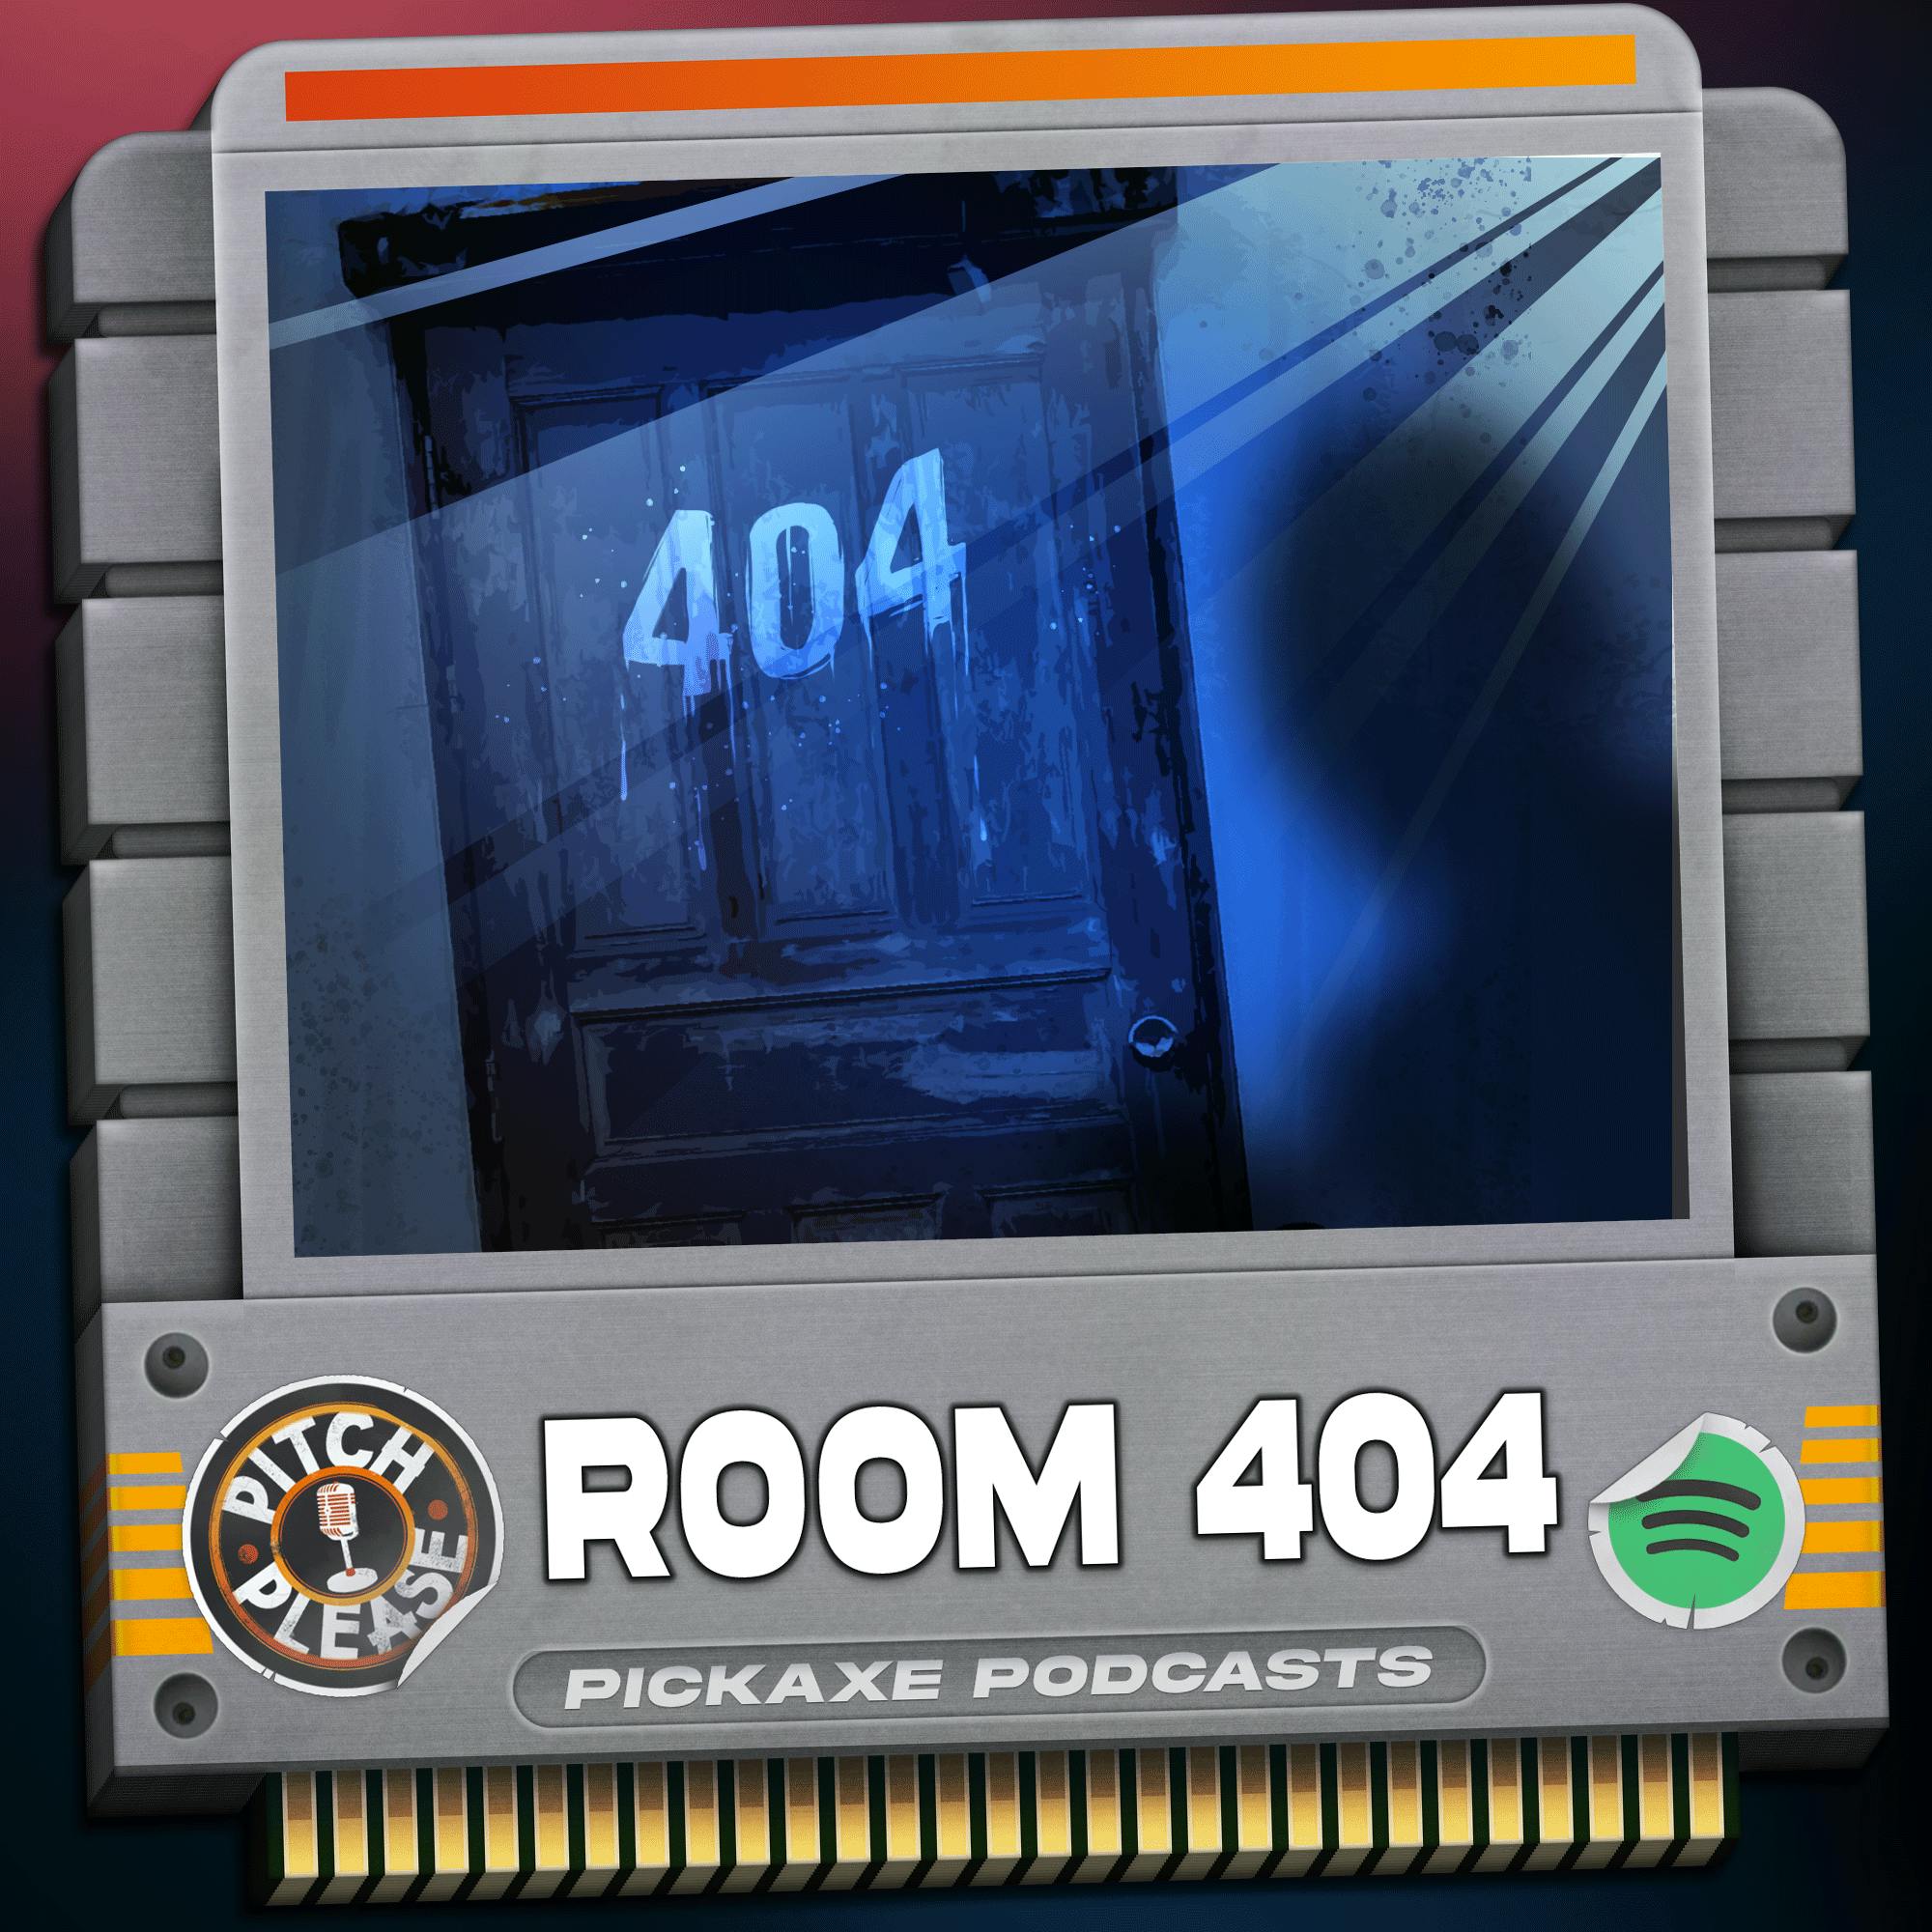 Pitch, Please - Room 404